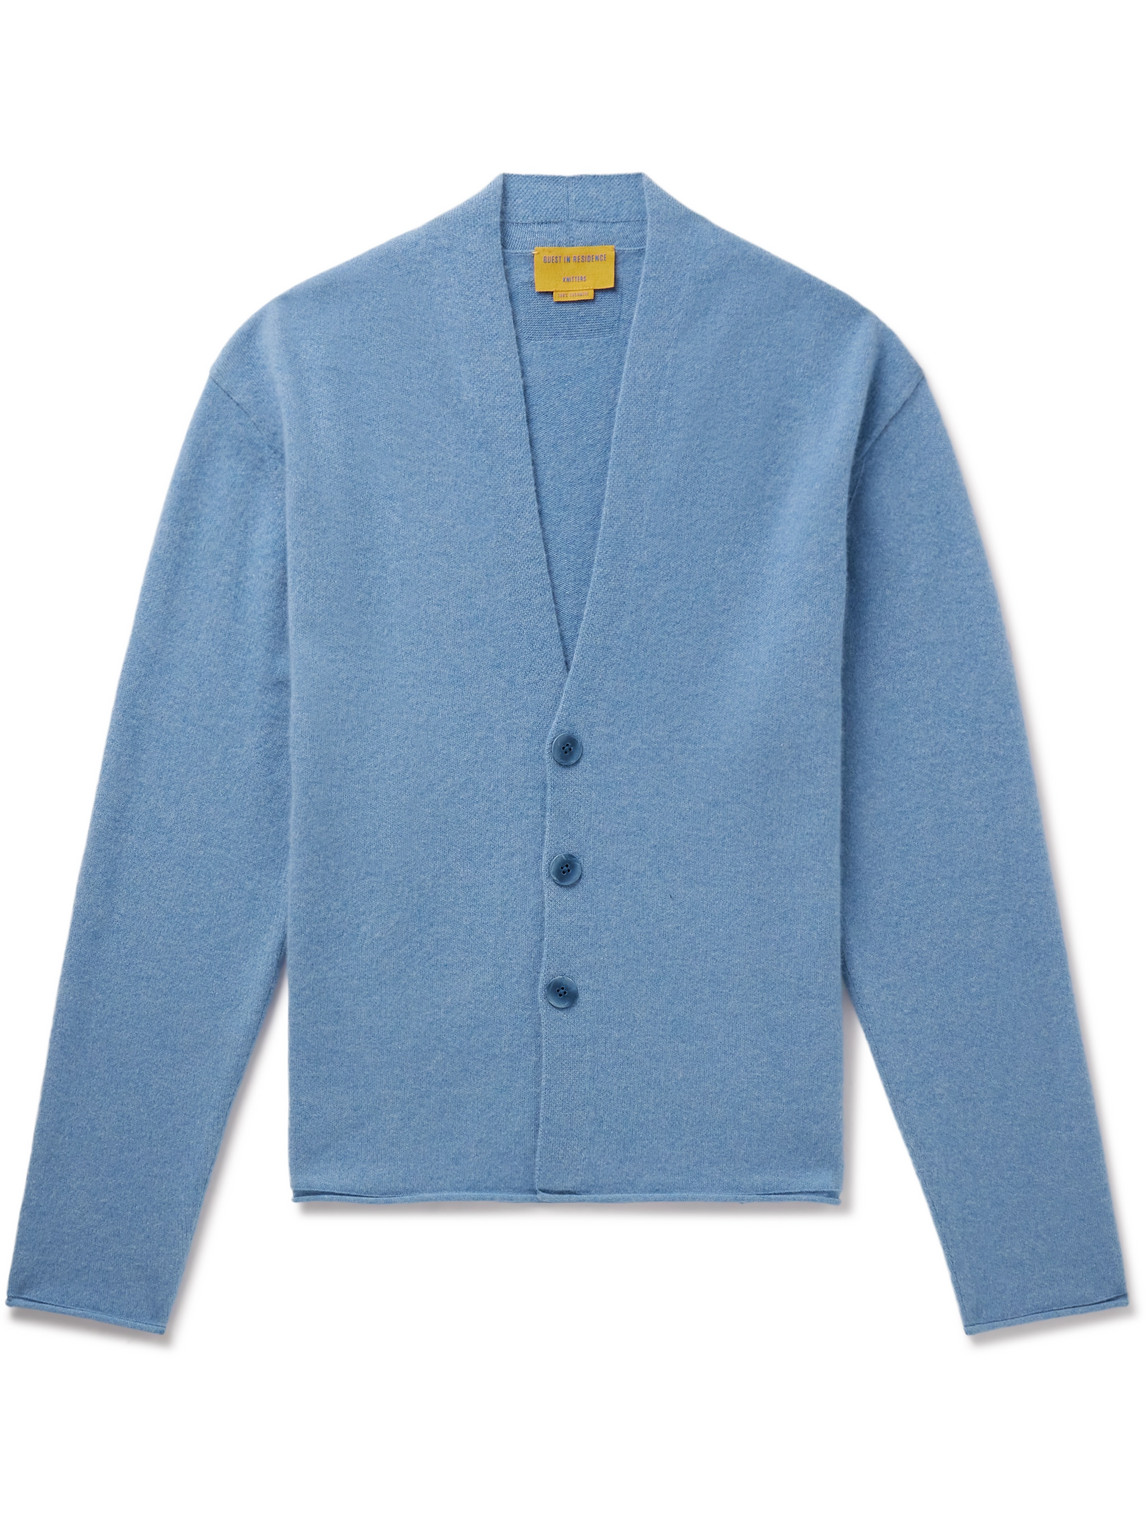 Guest In Residence - Everywear Cashmere Cardigan - Men - Blue - XL von Guest In Residence